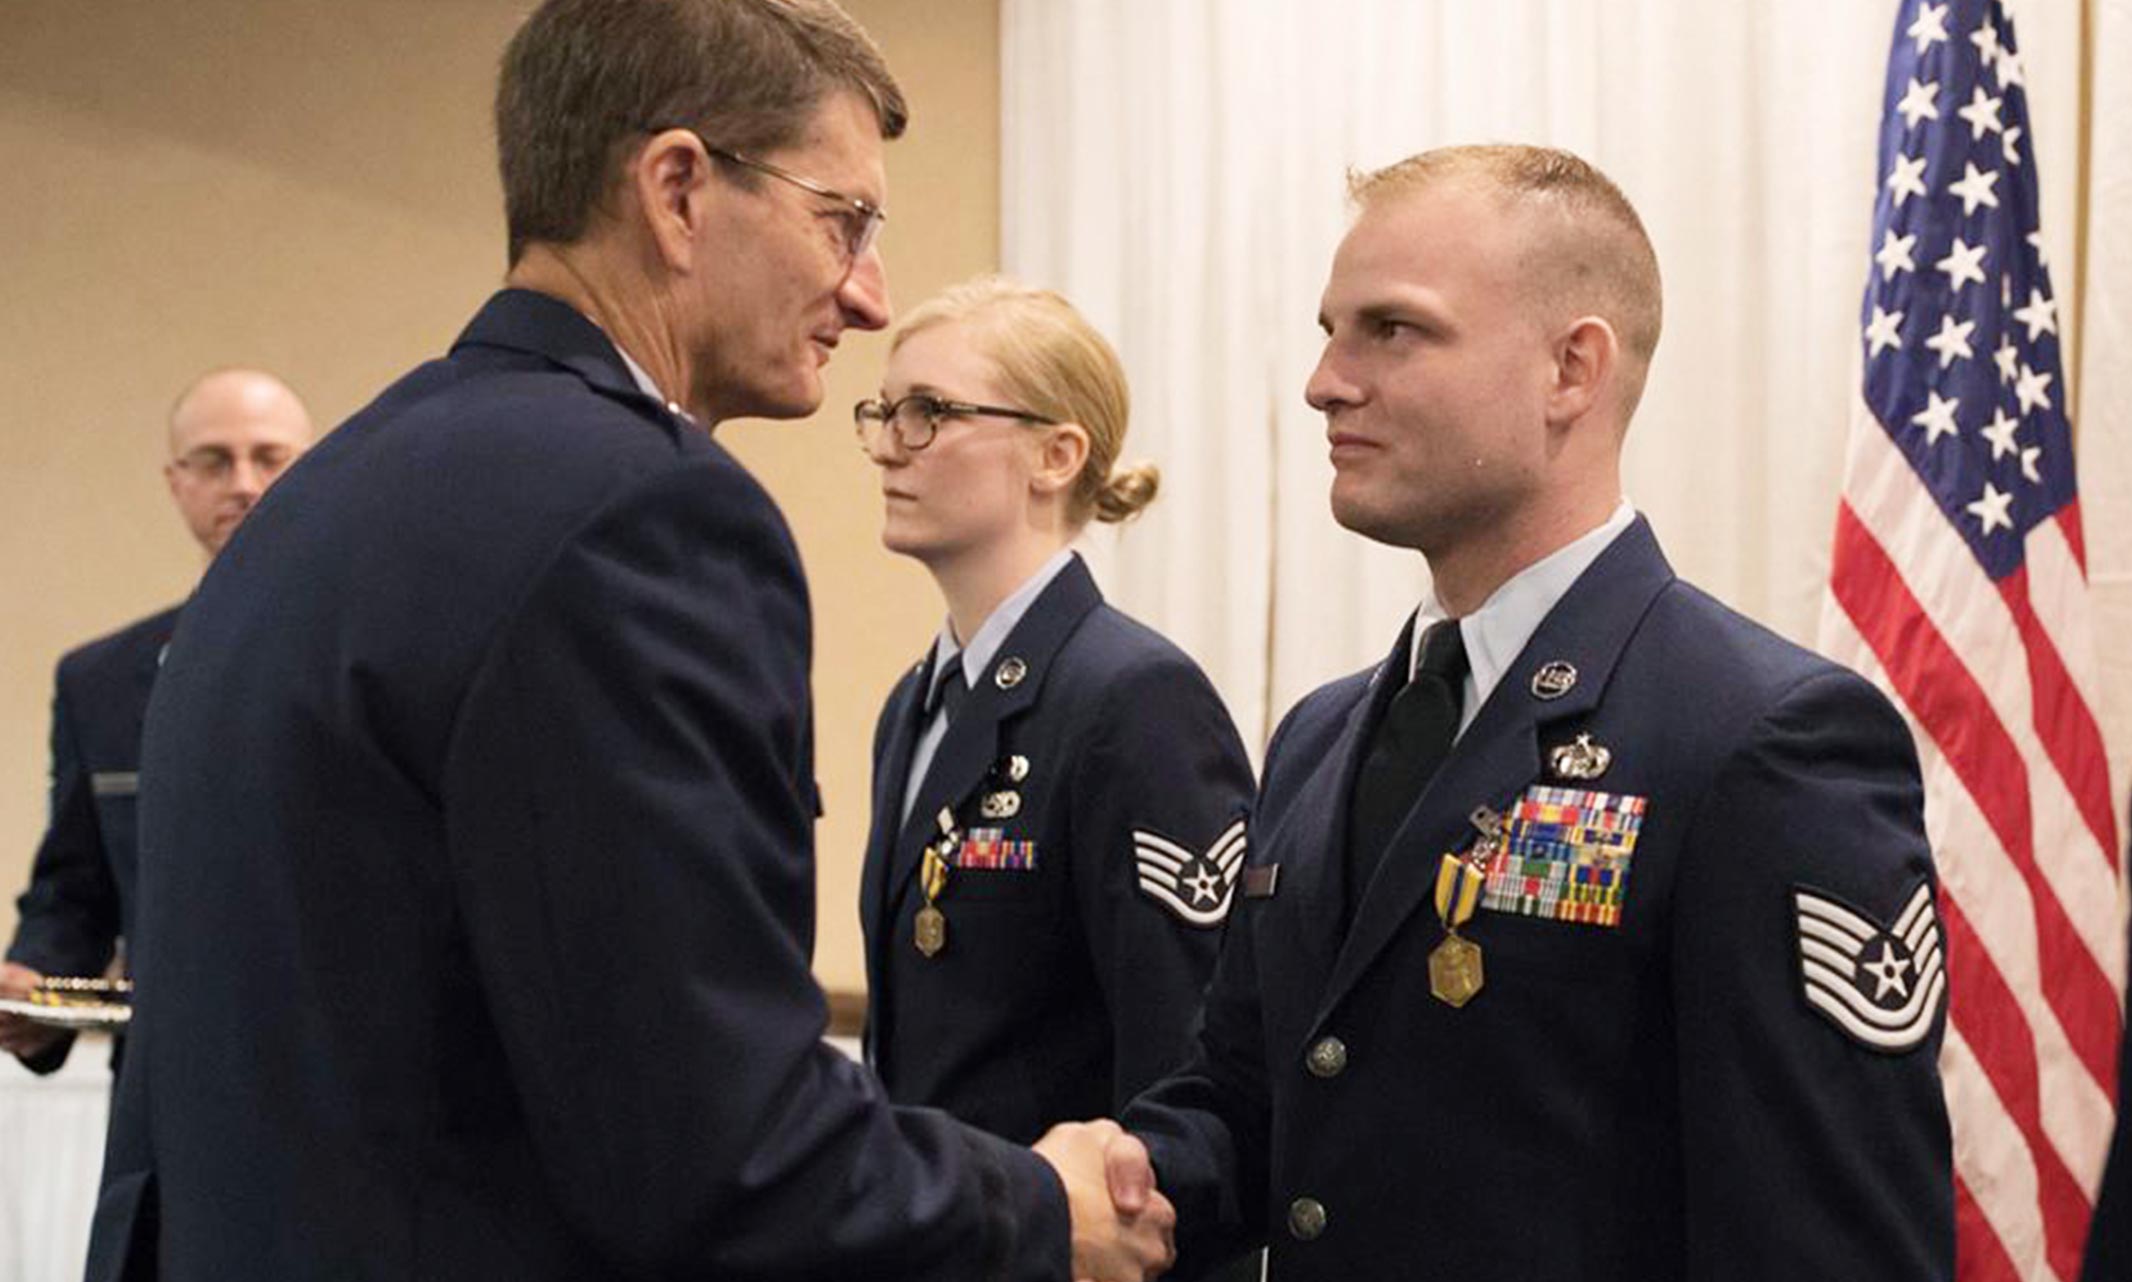 Colton Elliott selected for Non-Commissioned Officer of the Year award from the Missouri Air National Guard